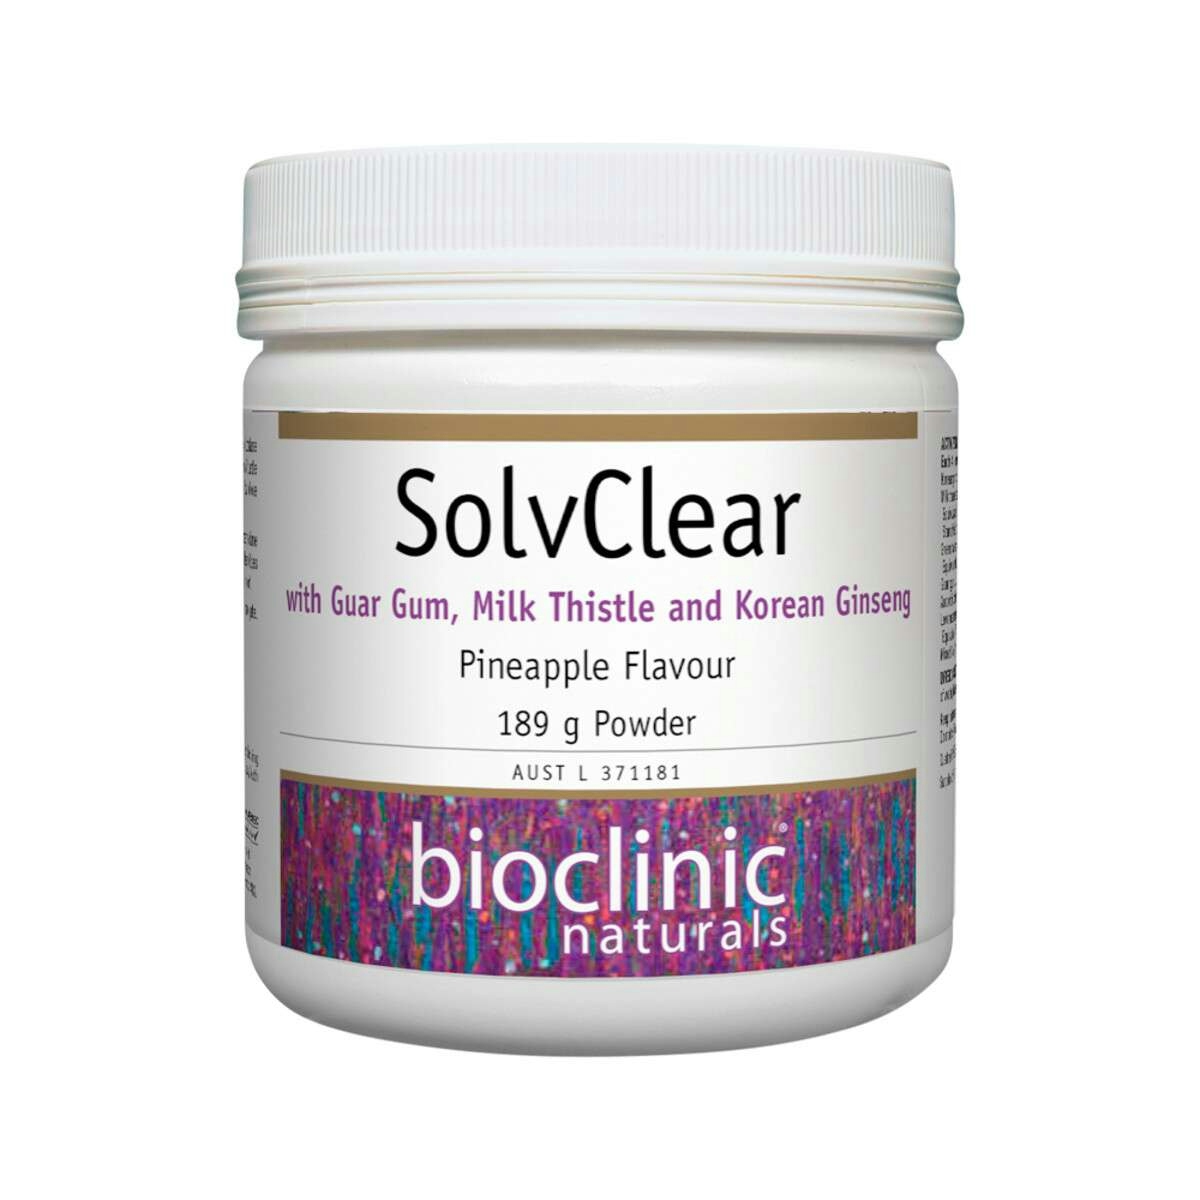 image of Bioclinic Naturals SolvClear Pineapple 189g on white background